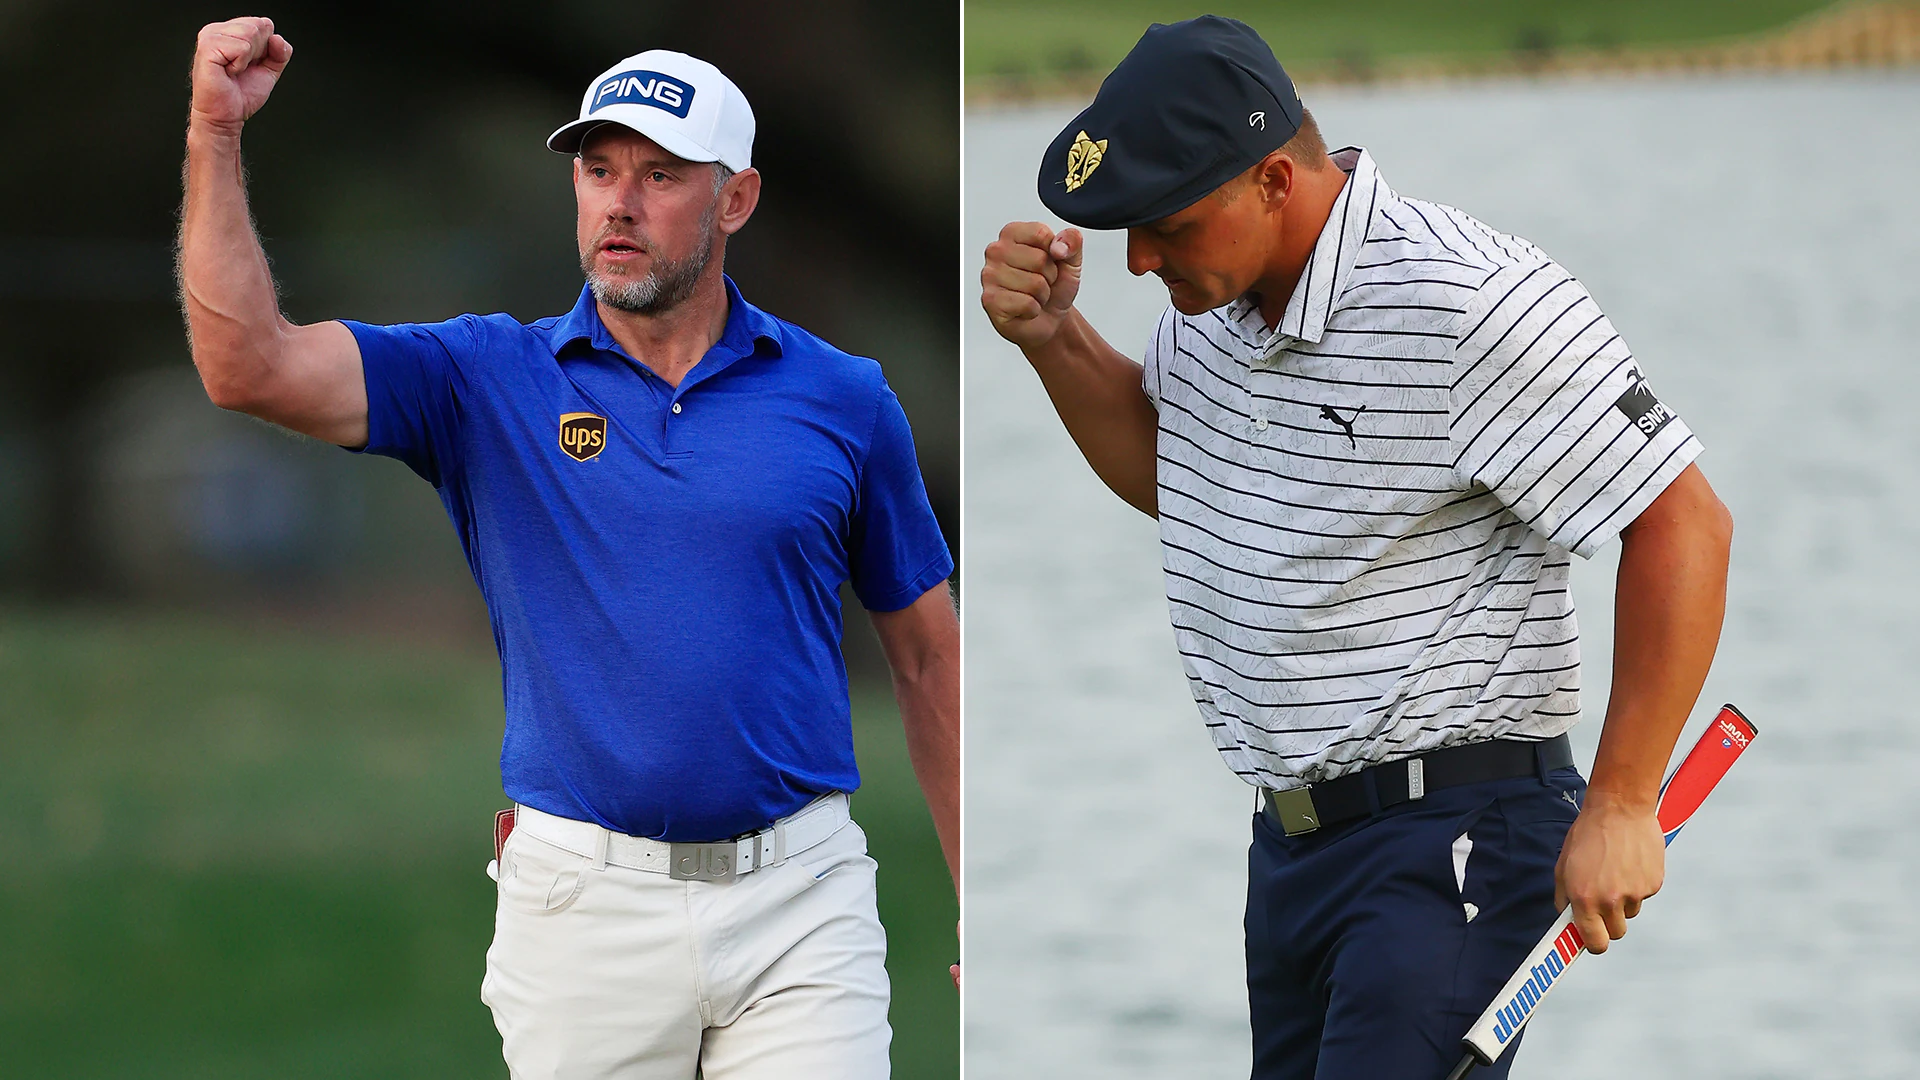 Round 2, the rematch: Lee Westwood and Bryson DeChambeau again in final twosome